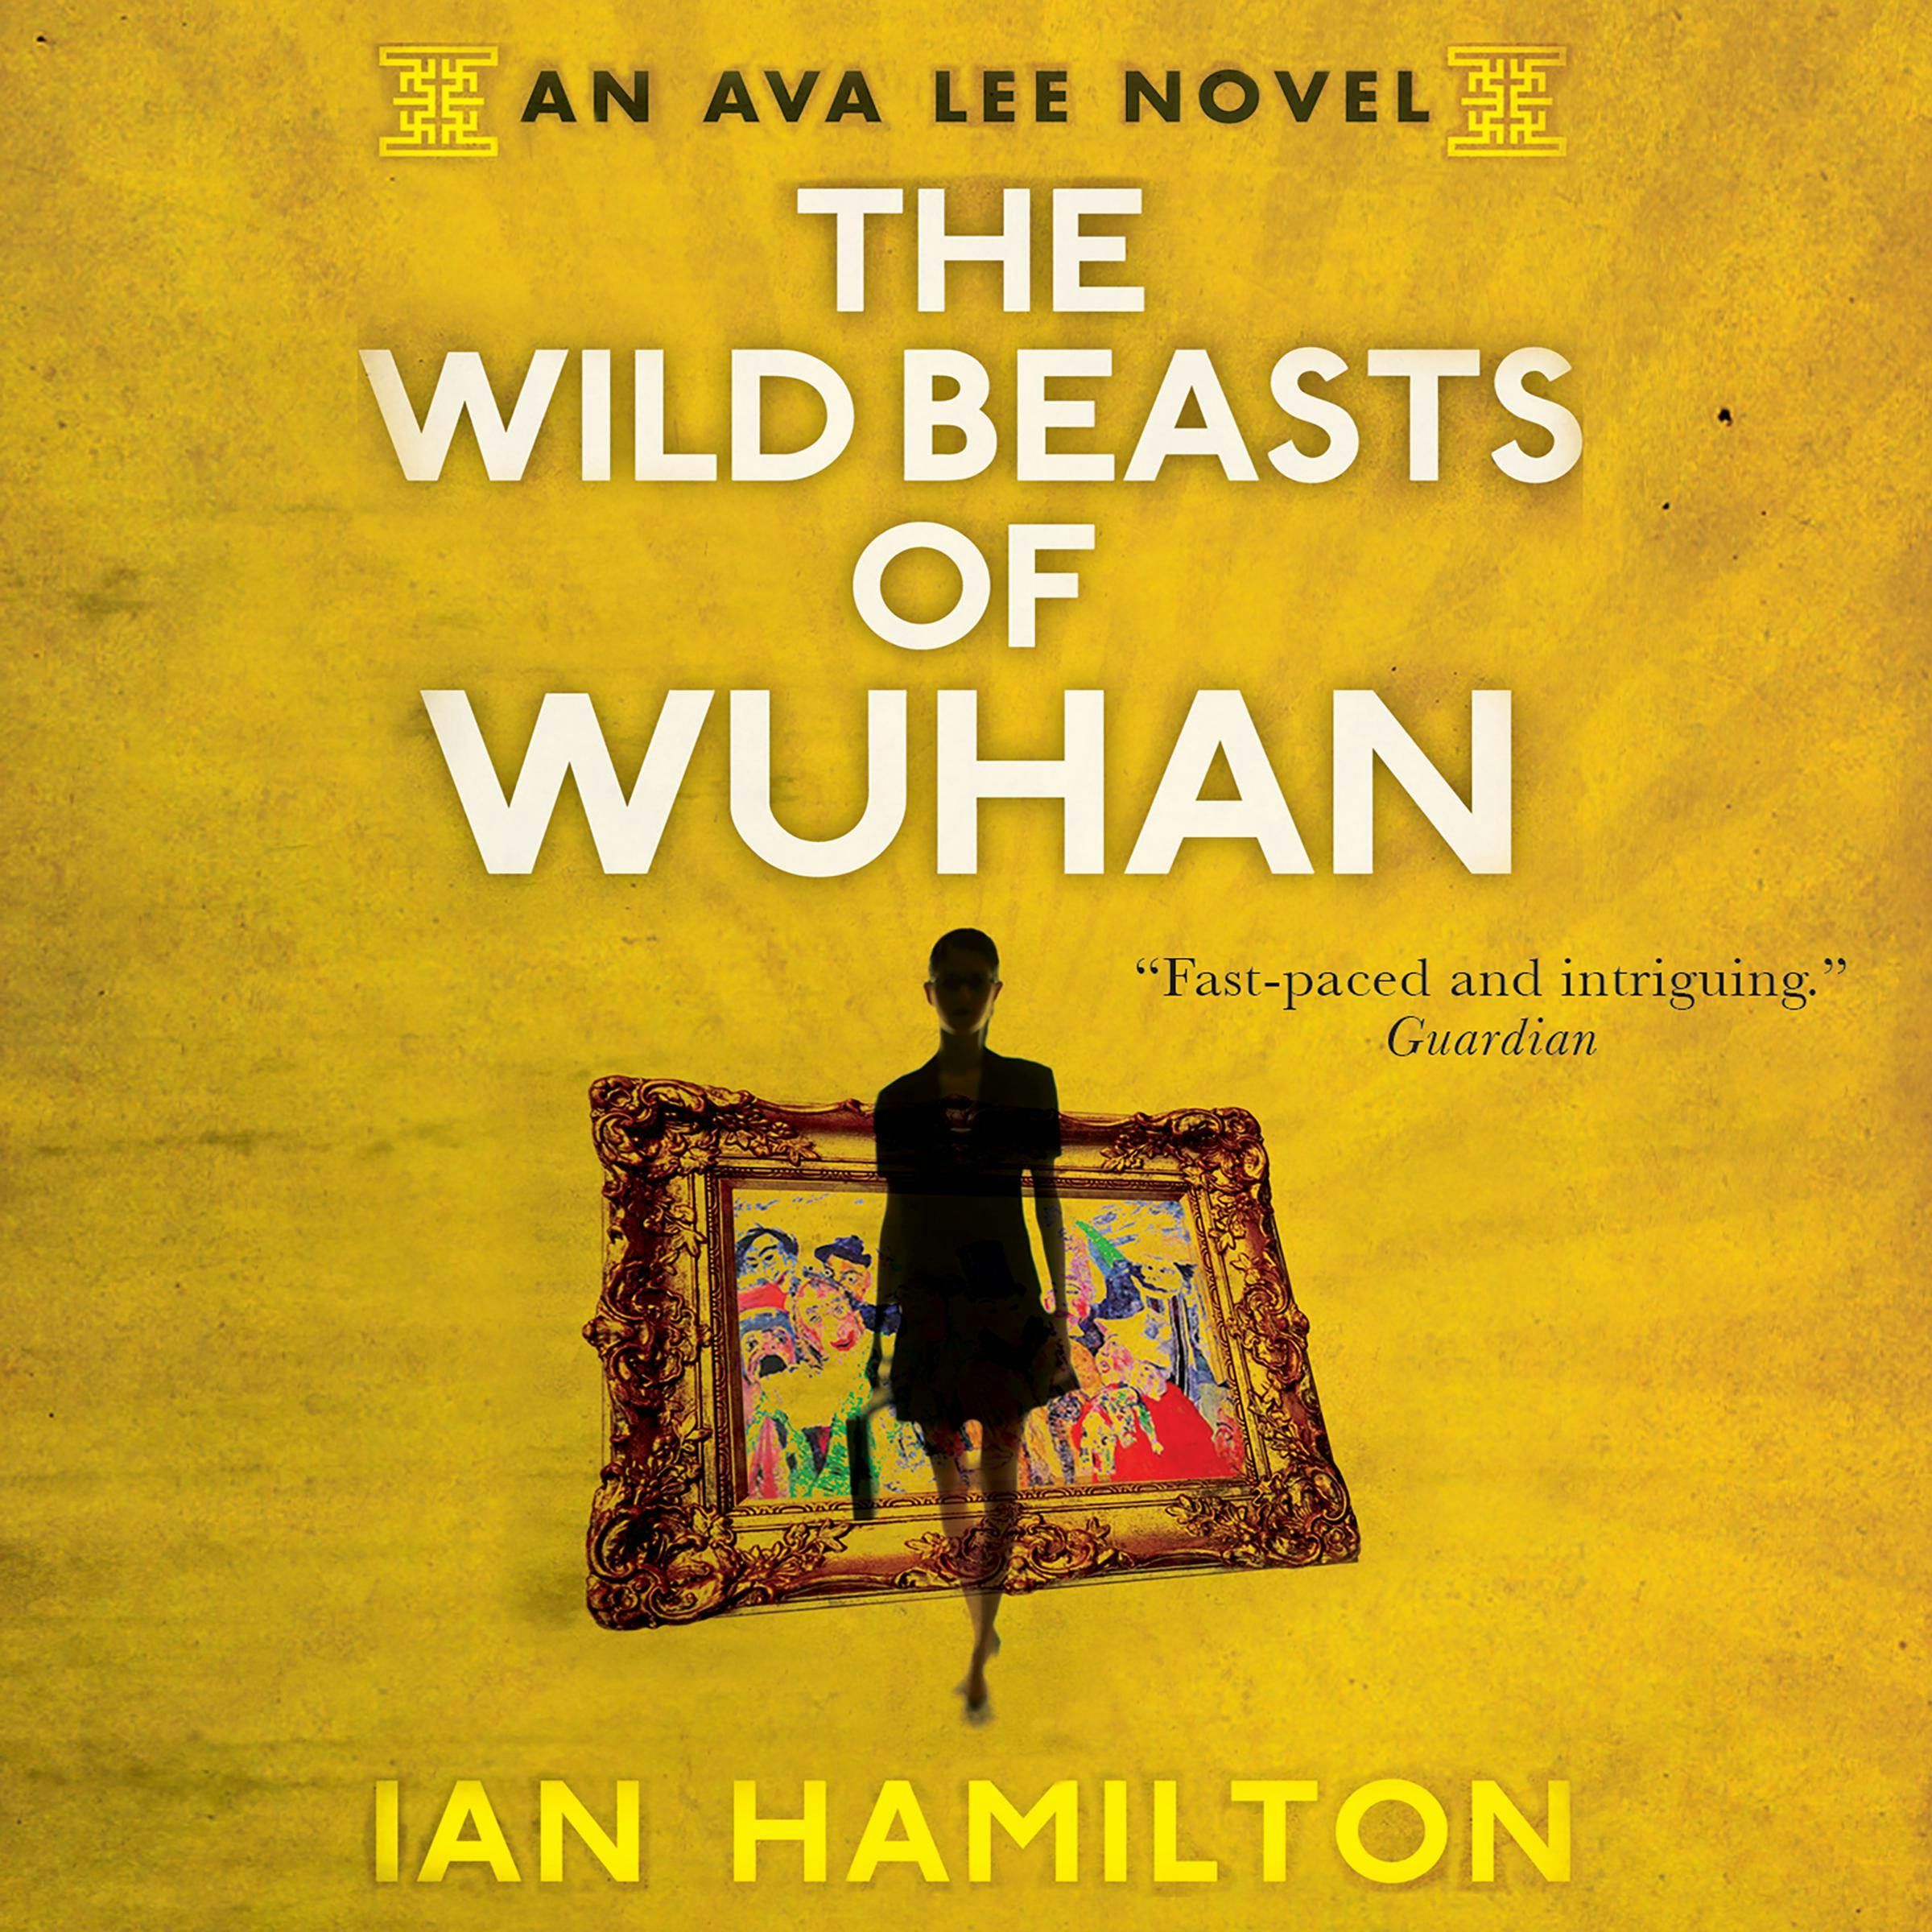 The Wild Beasts of Wuhan - undefined